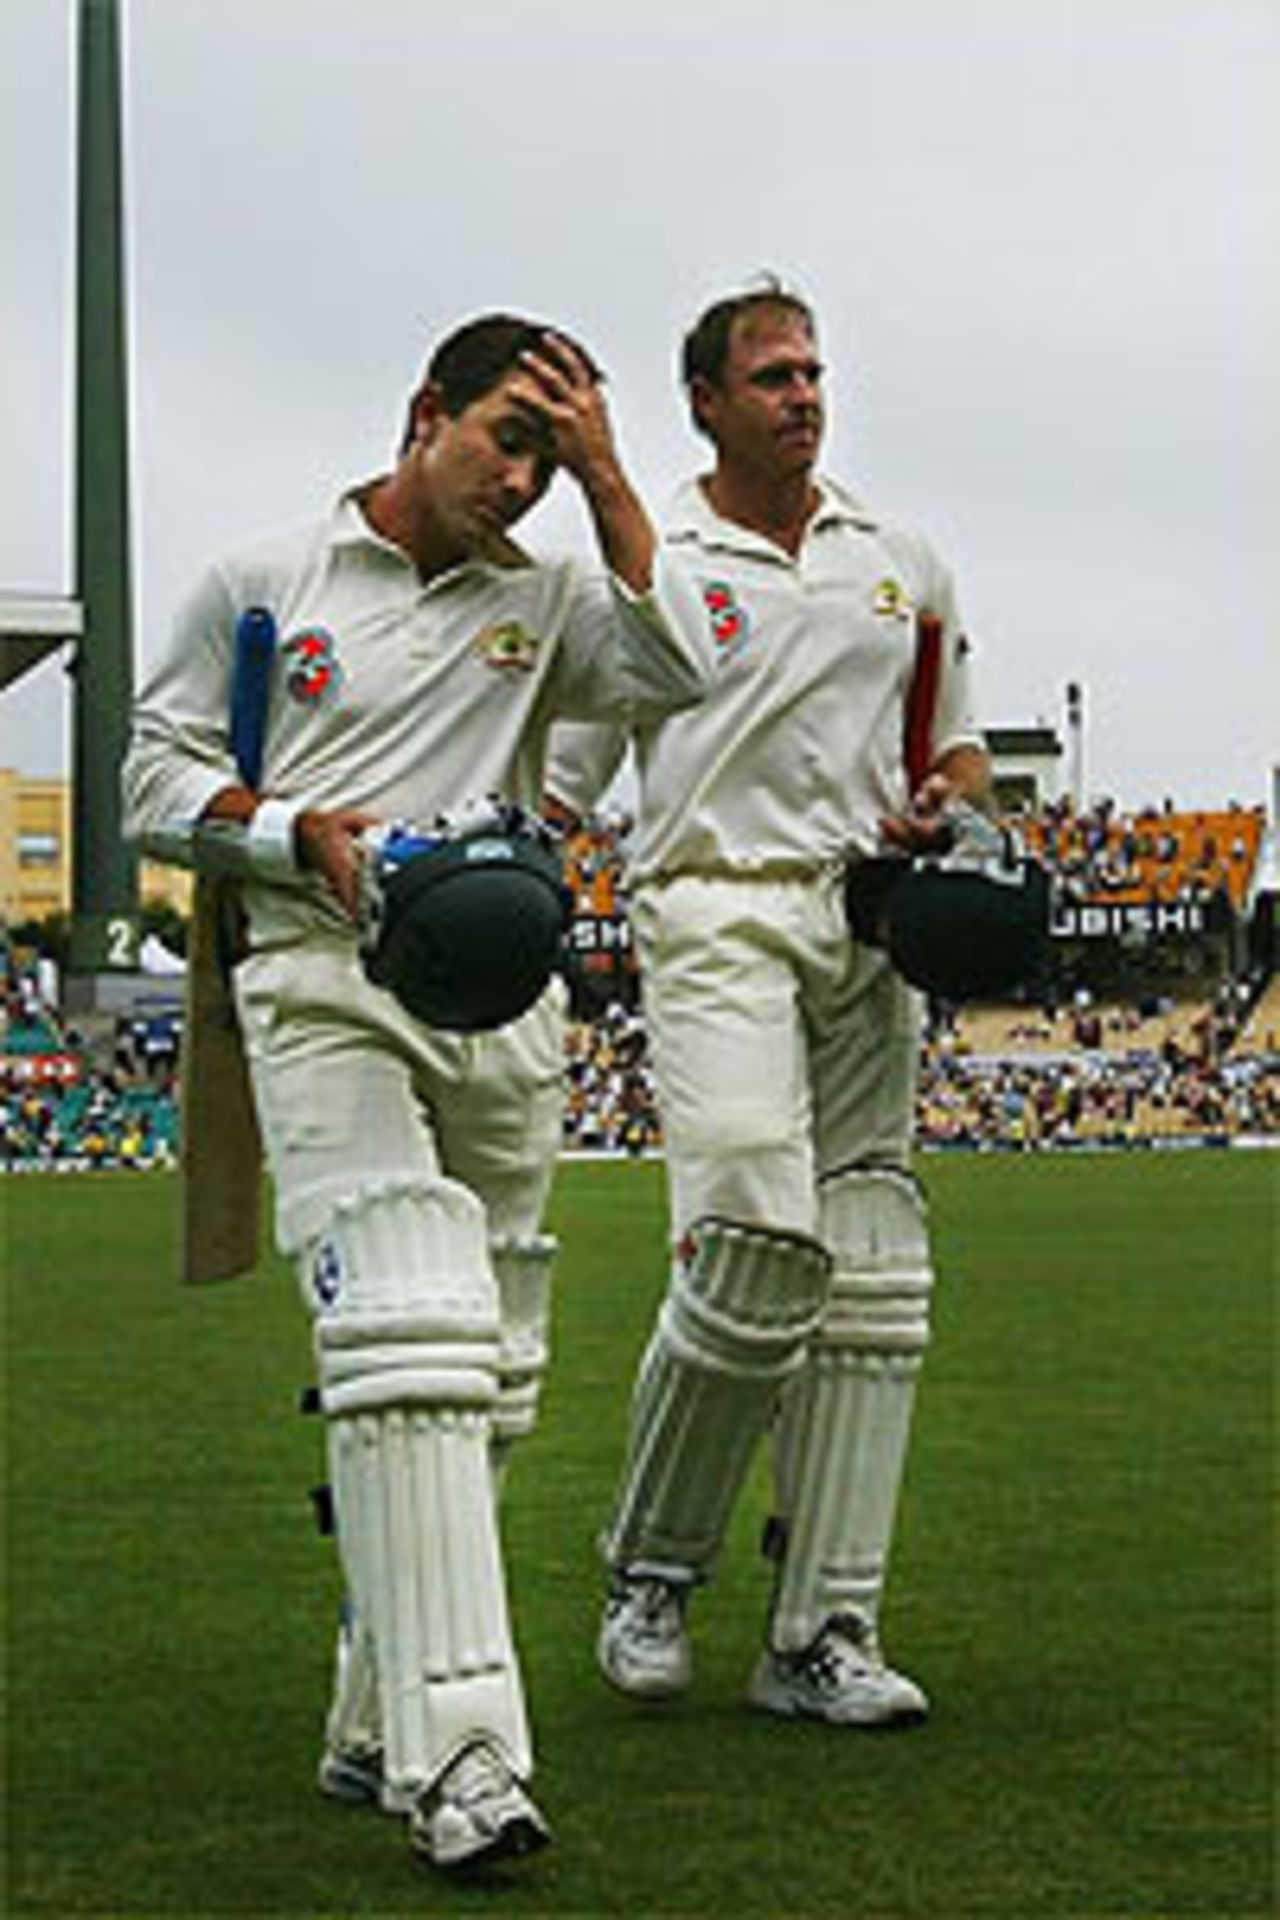 Justin Langer and Matthew Hayden of Australia leave the field together during day four of the 4th Test between Australia and India at the SCG on January 5, 2004 in Sydney, Australia